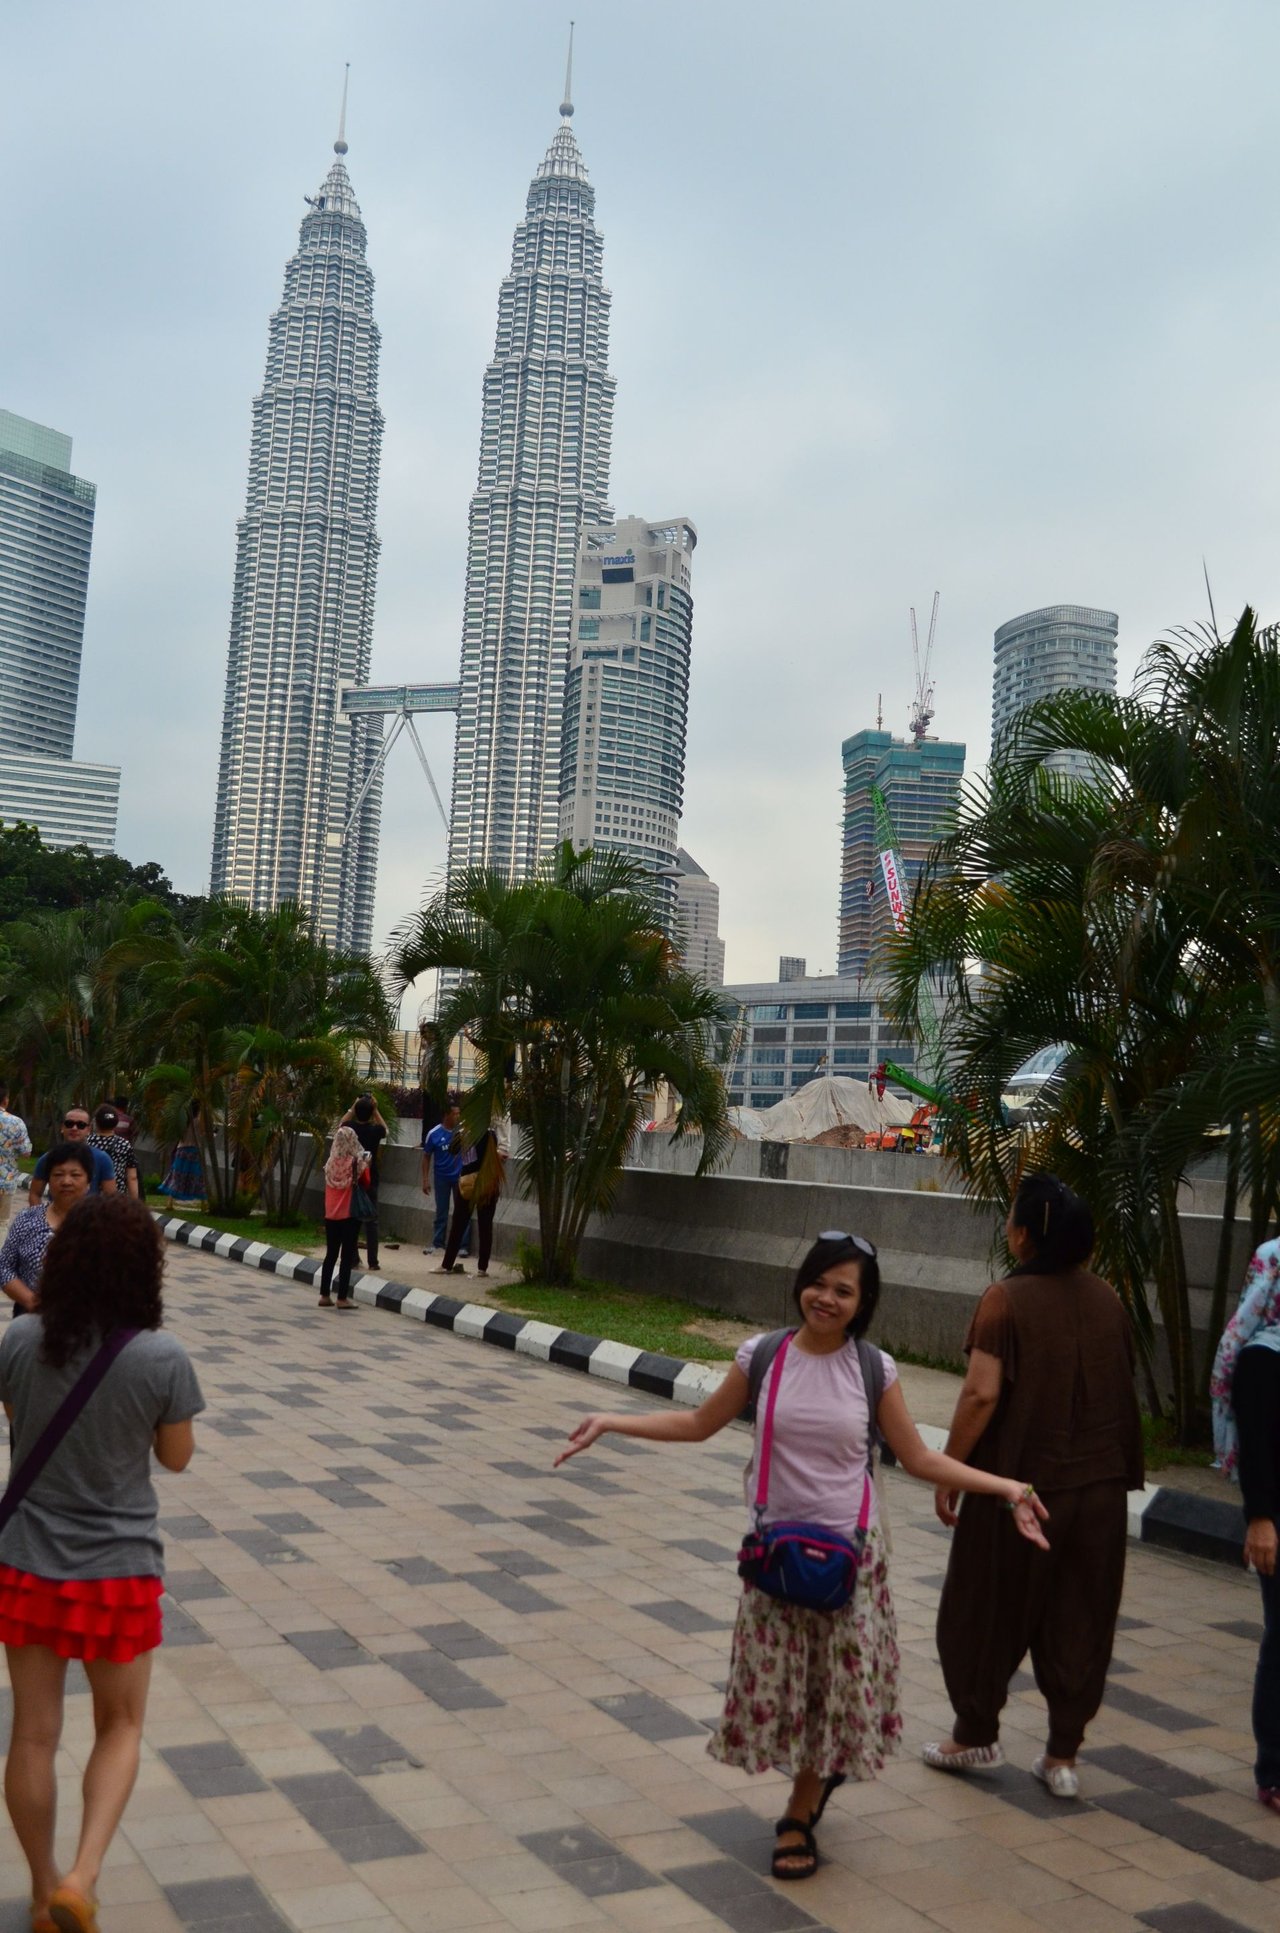 Explore Kuala Lumpur's first crowd sourced pocket park